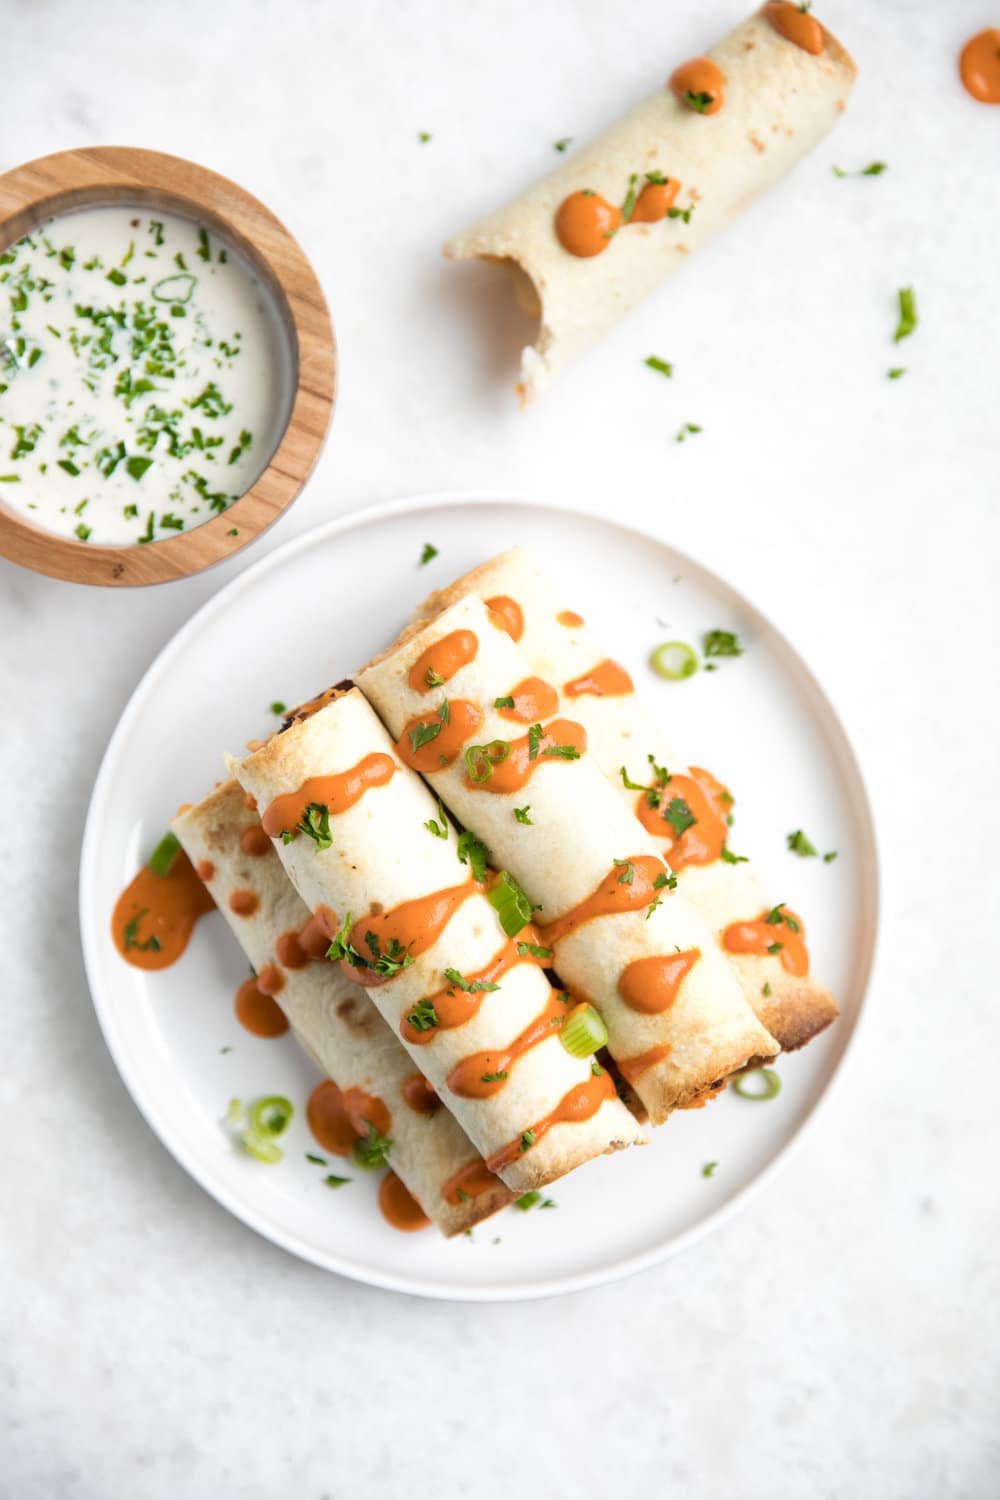 10 Easy Dinners for Busy Nights - Buffalo Chicken and Cauliflower Taquitos